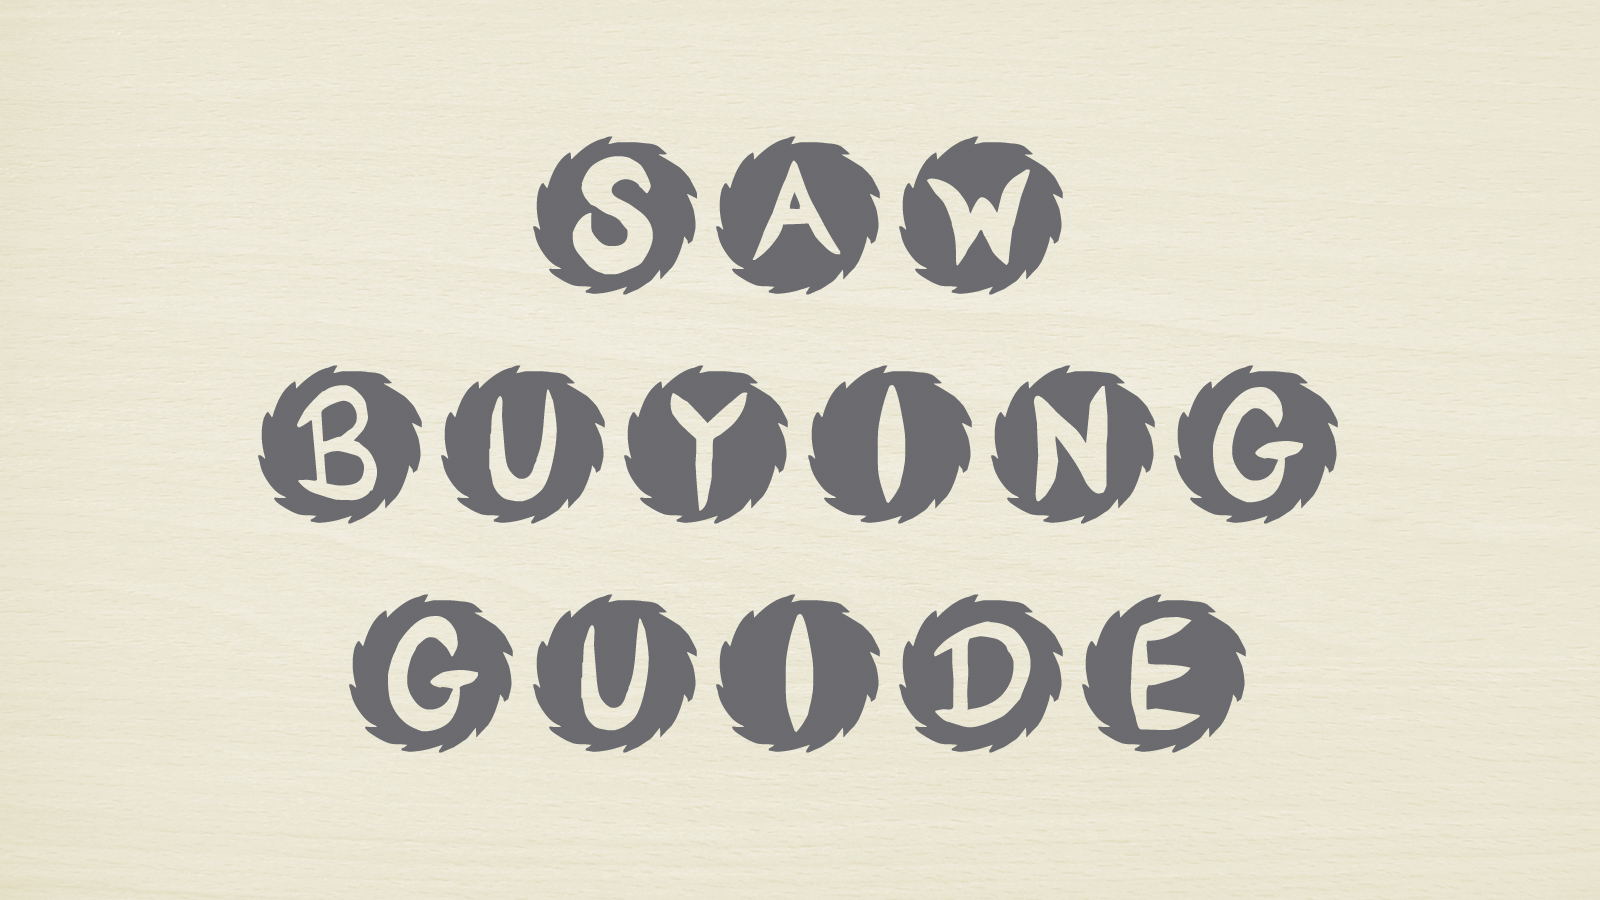 Tool Time – Saw Buying Guide